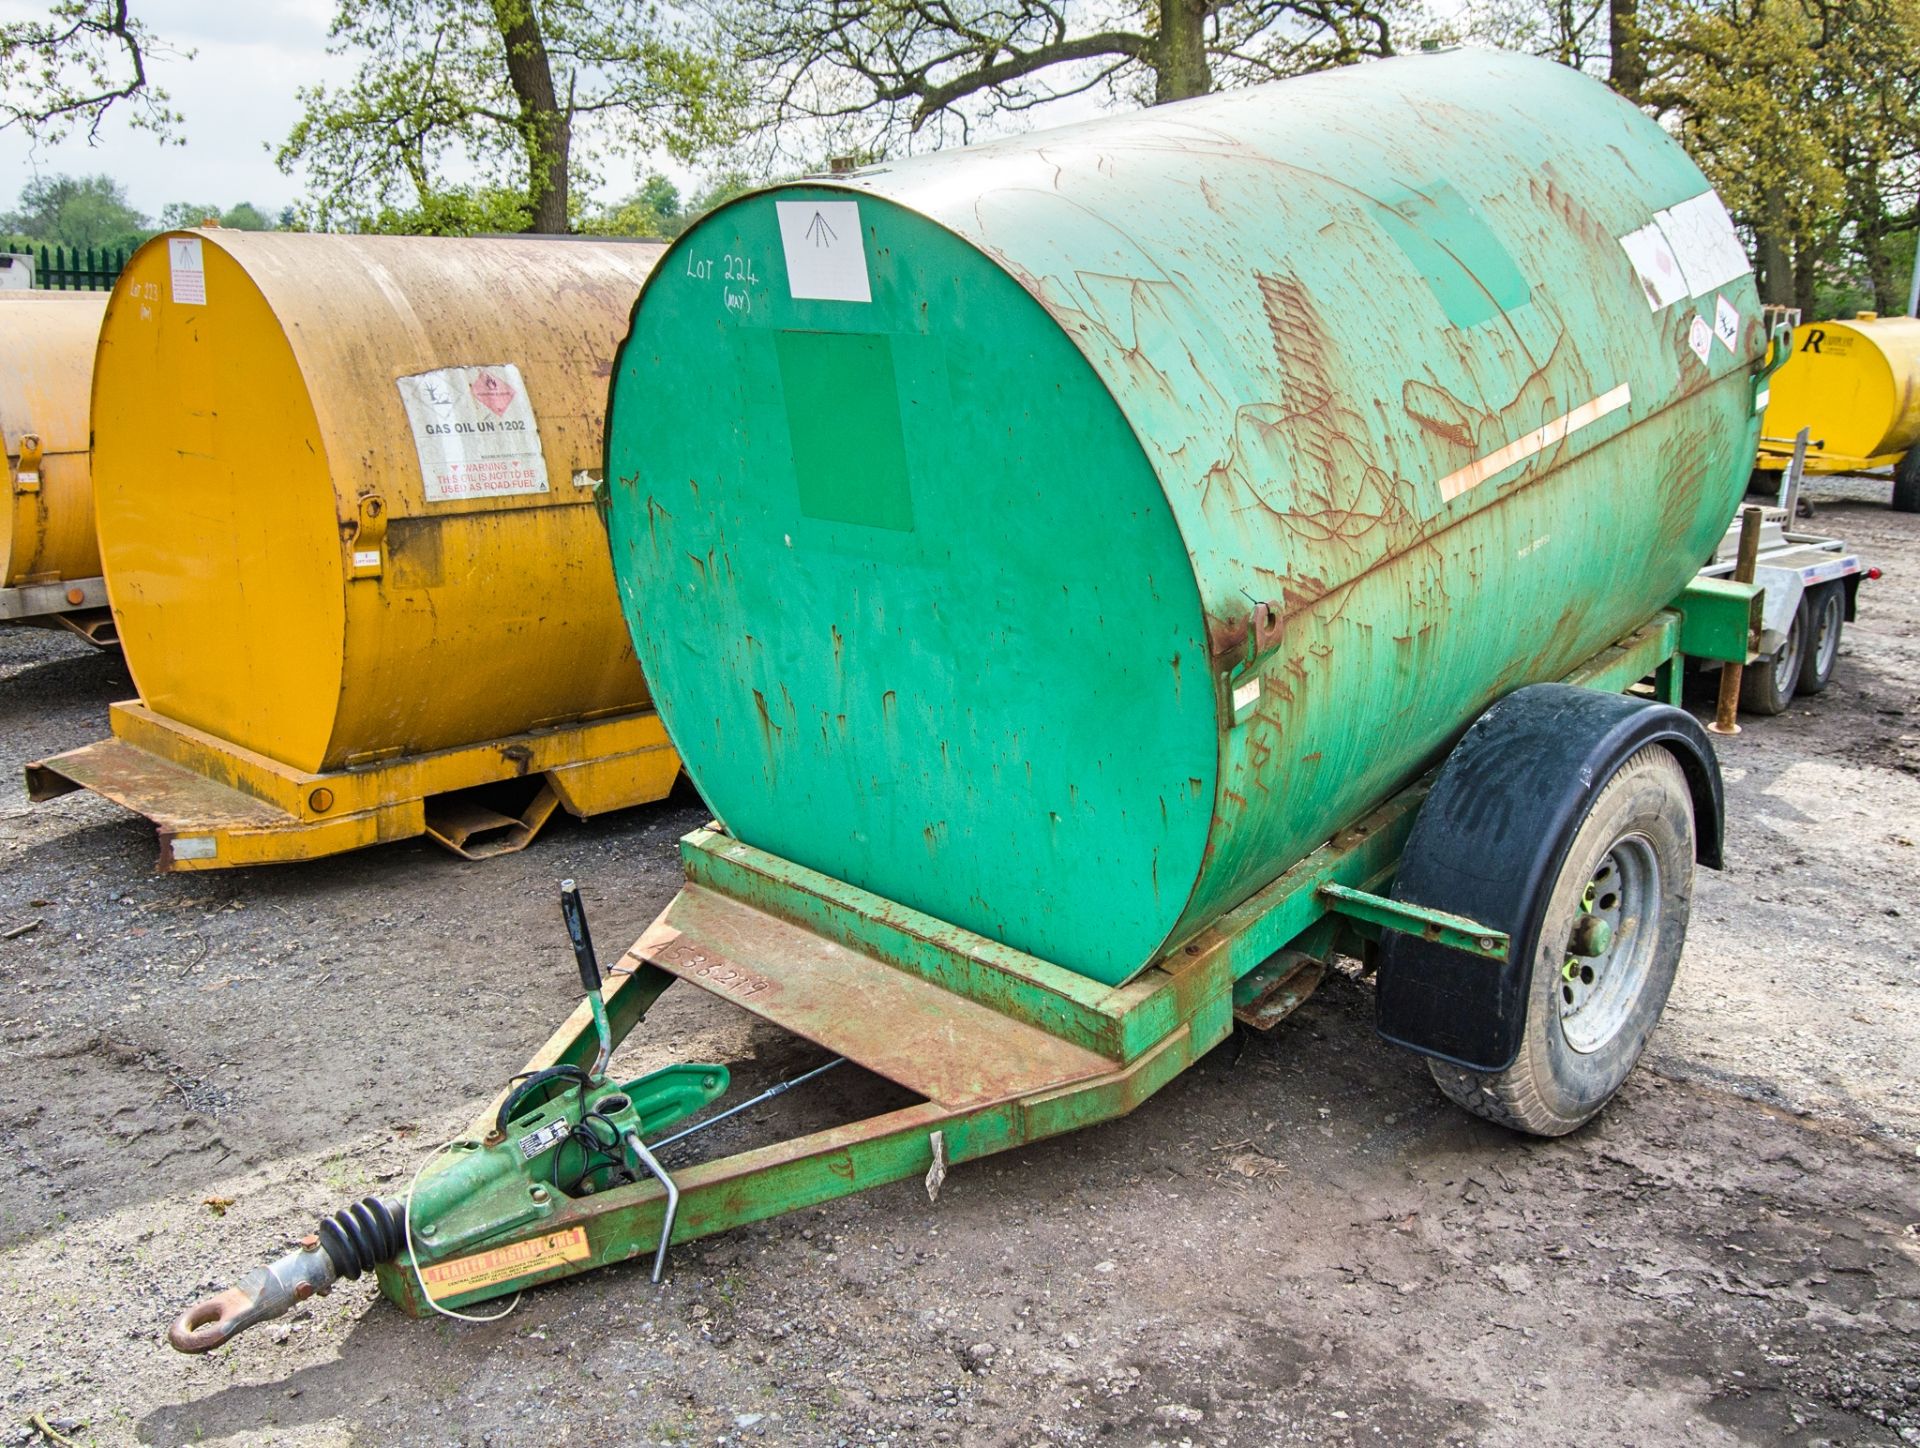 Trailer Engineering 2140 litre single axle fast tow mobile bunded fuel bowser c/w manual pump.